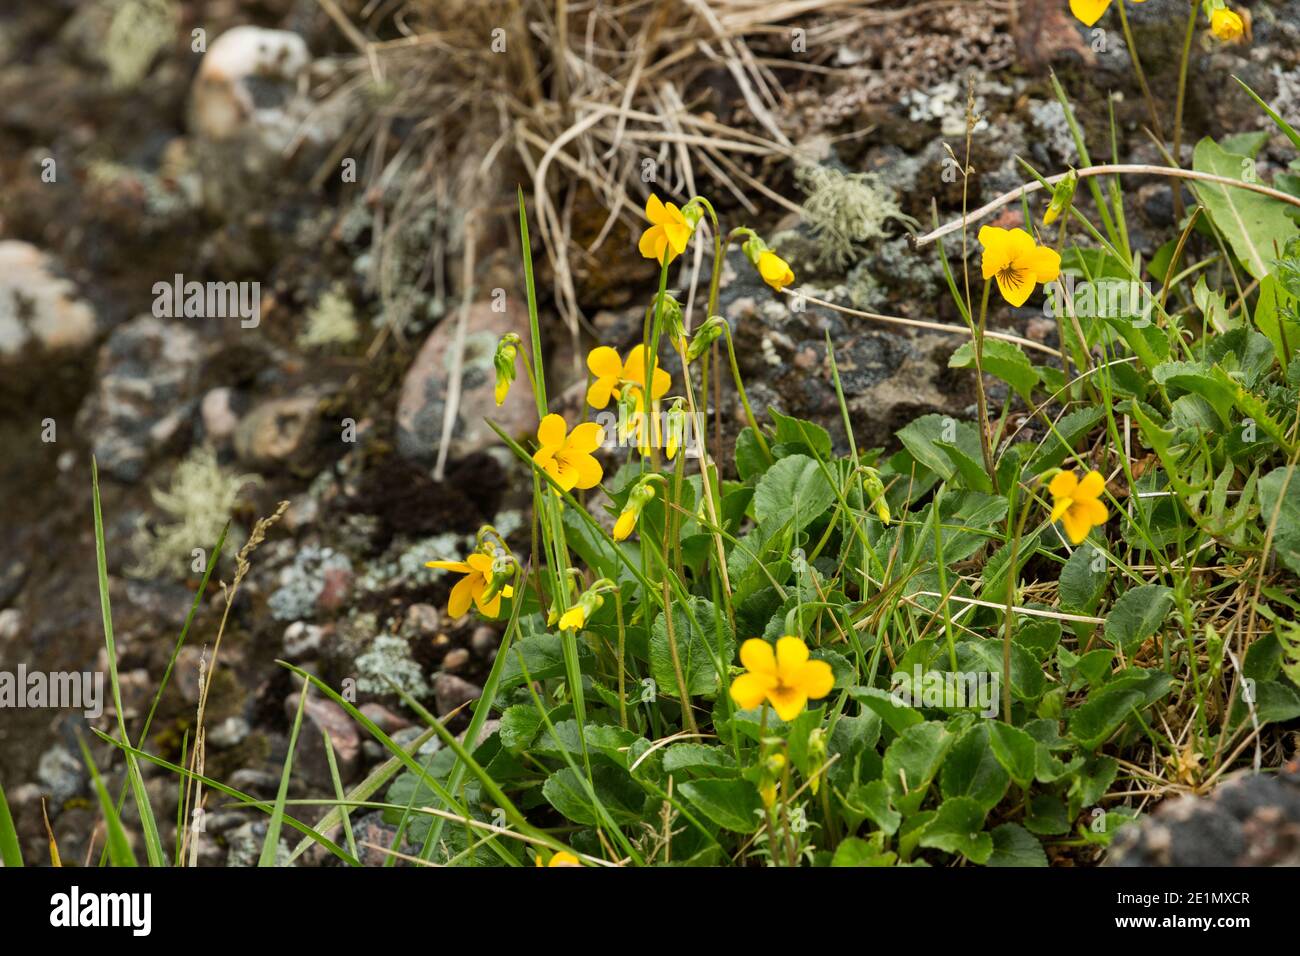 Patagonian yellow violets (viola reichei) flowering in spring near Milodon Cave, near Puerto Natales Patagonia, Chile Stock Photo